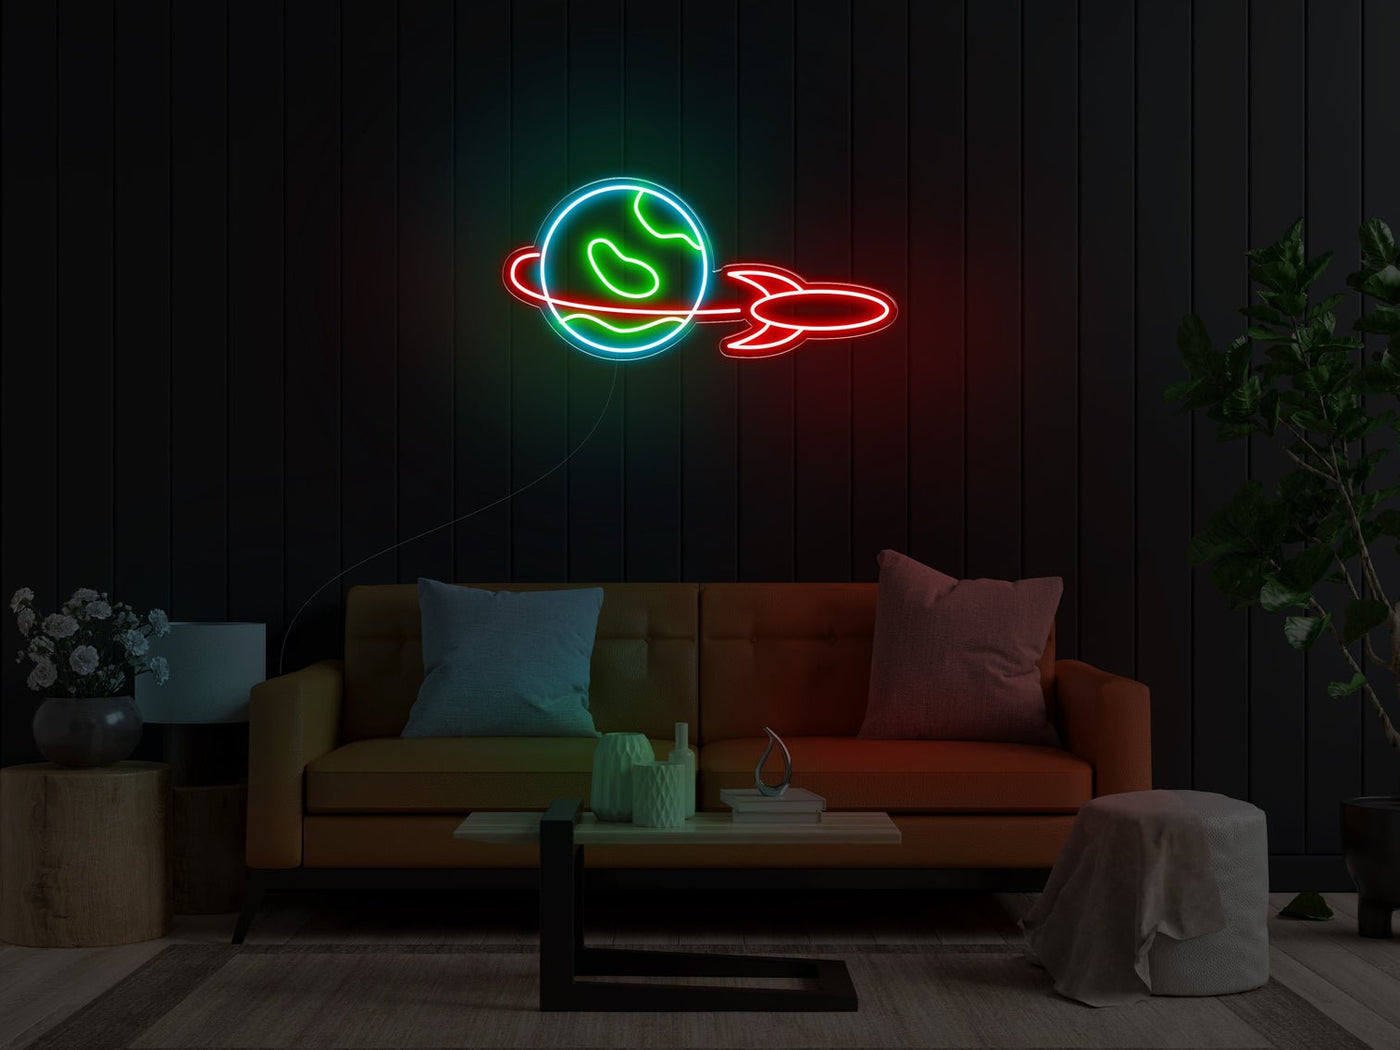 Outta this world LED neon sign - 41inch x 19inchIndoor